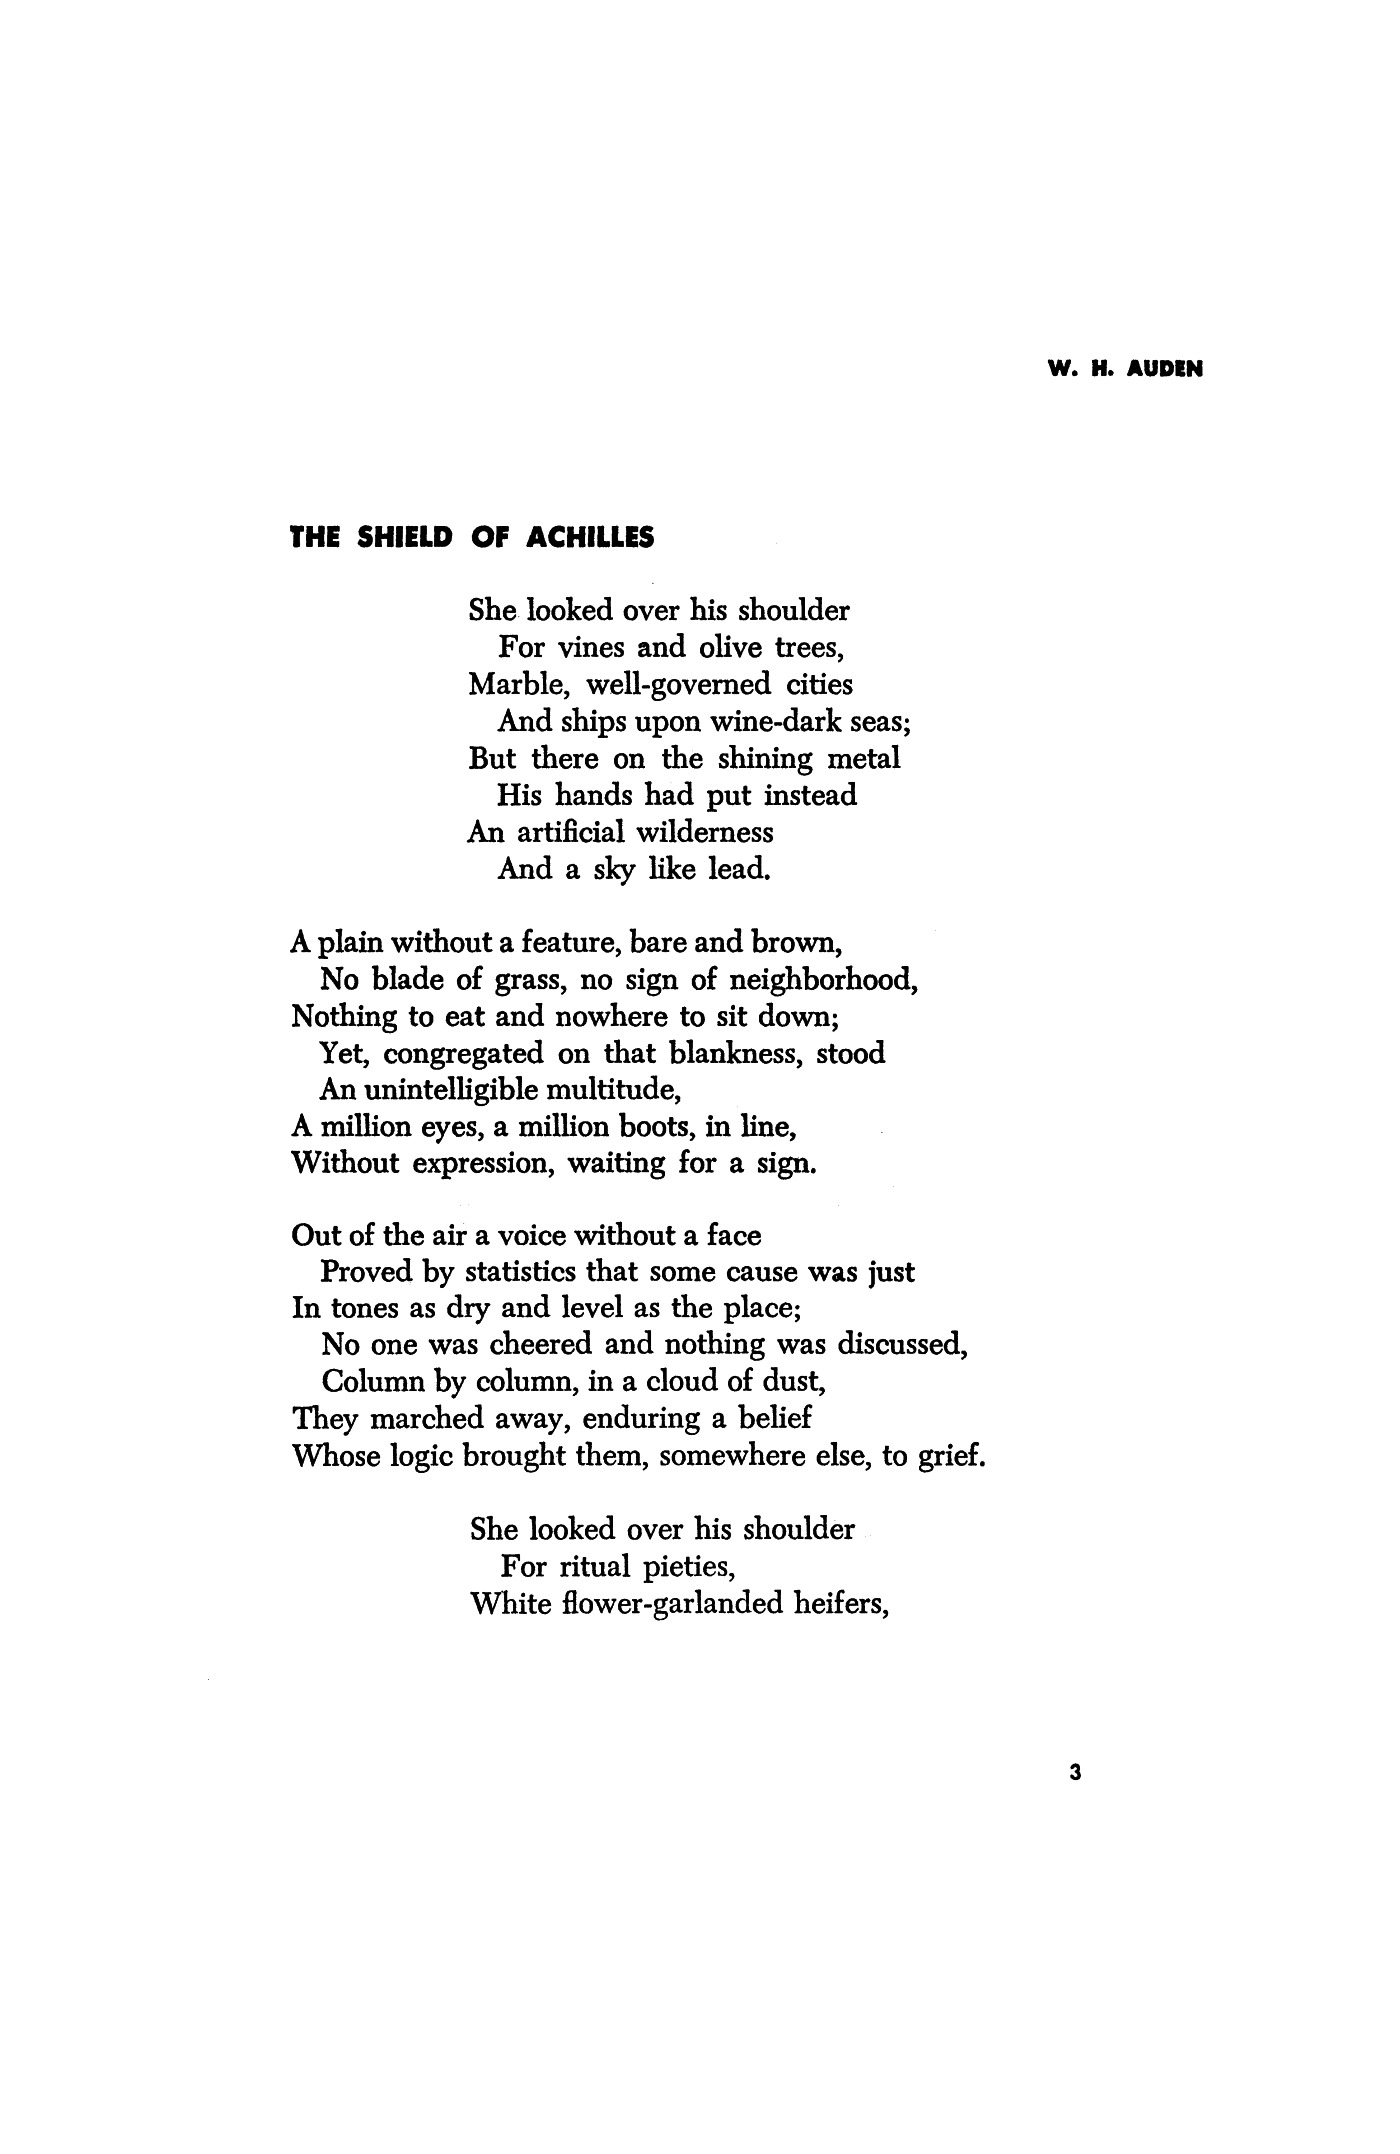 https://static.poetryfoundation.org/jstor/i20591908/pages/18.png